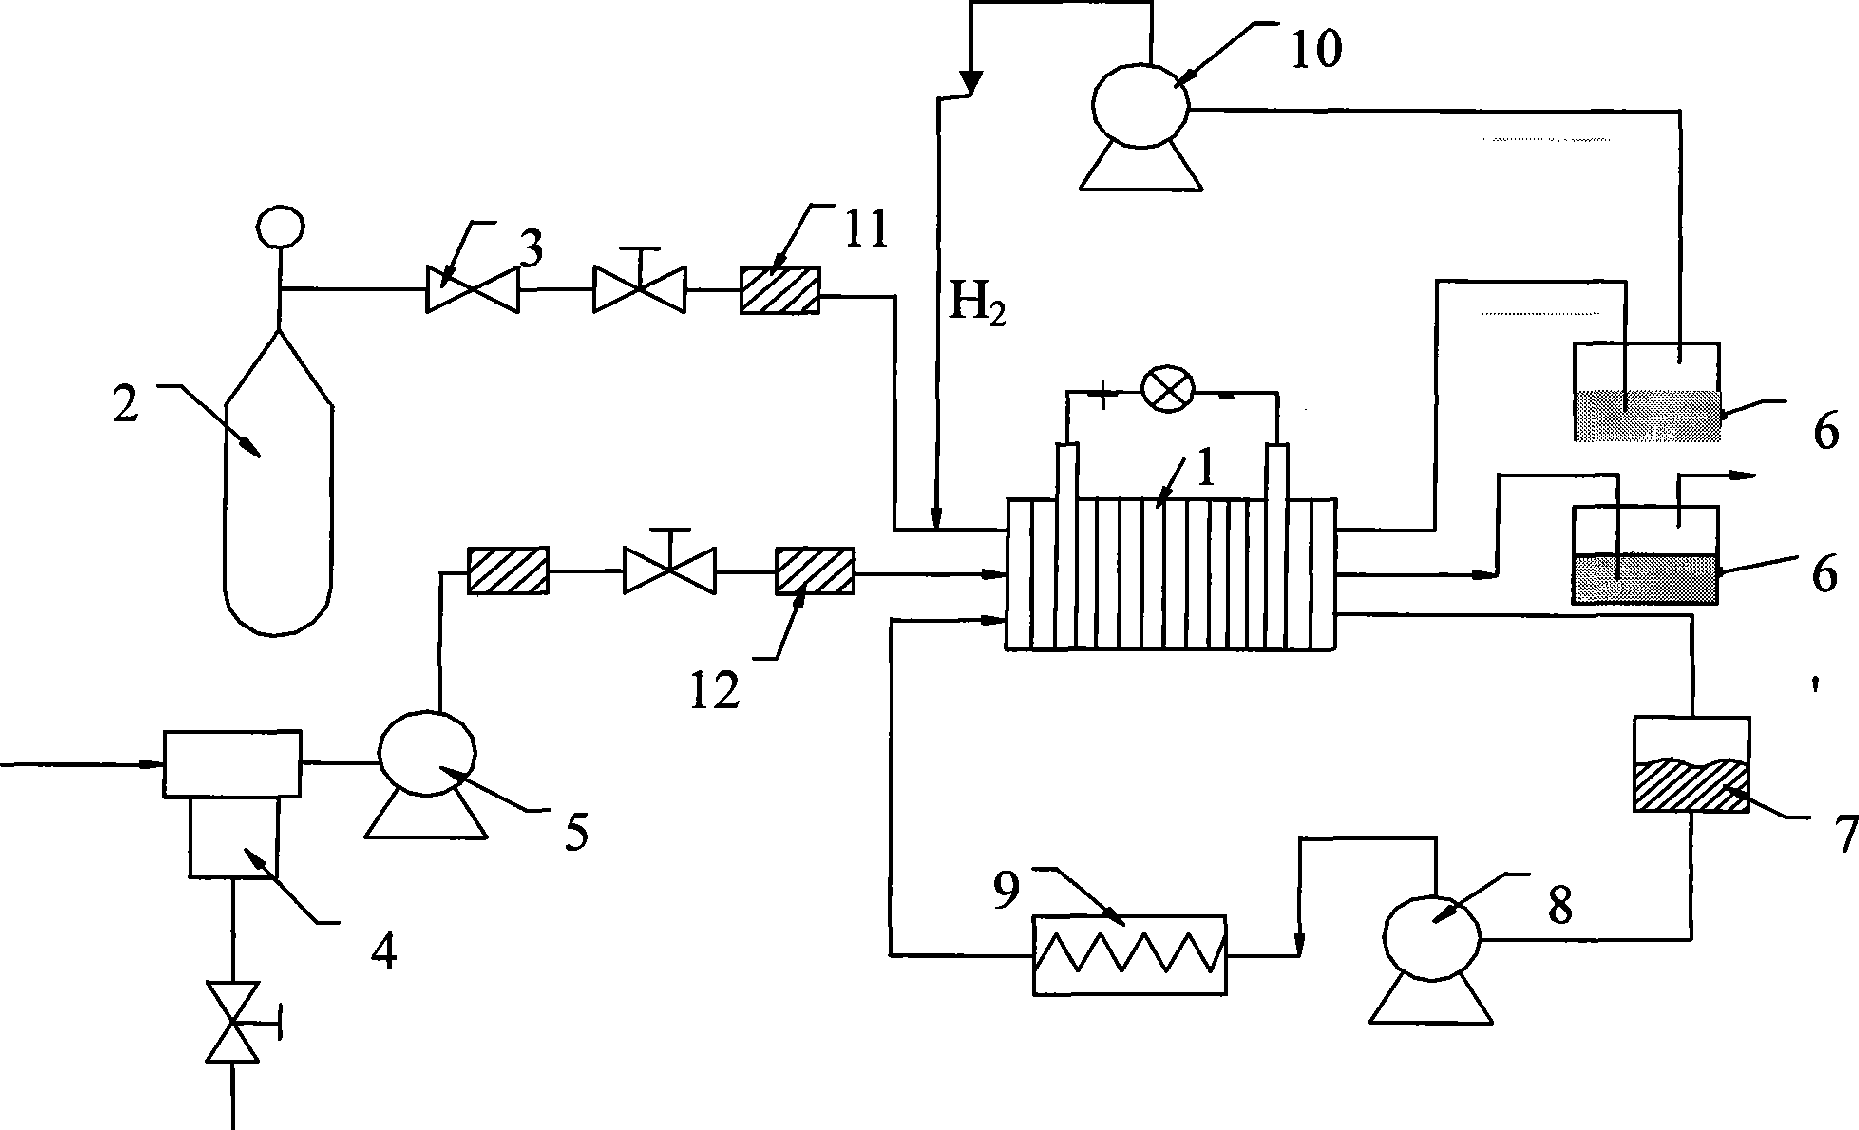 Hydrogen gas security protection system for fuel cell engine